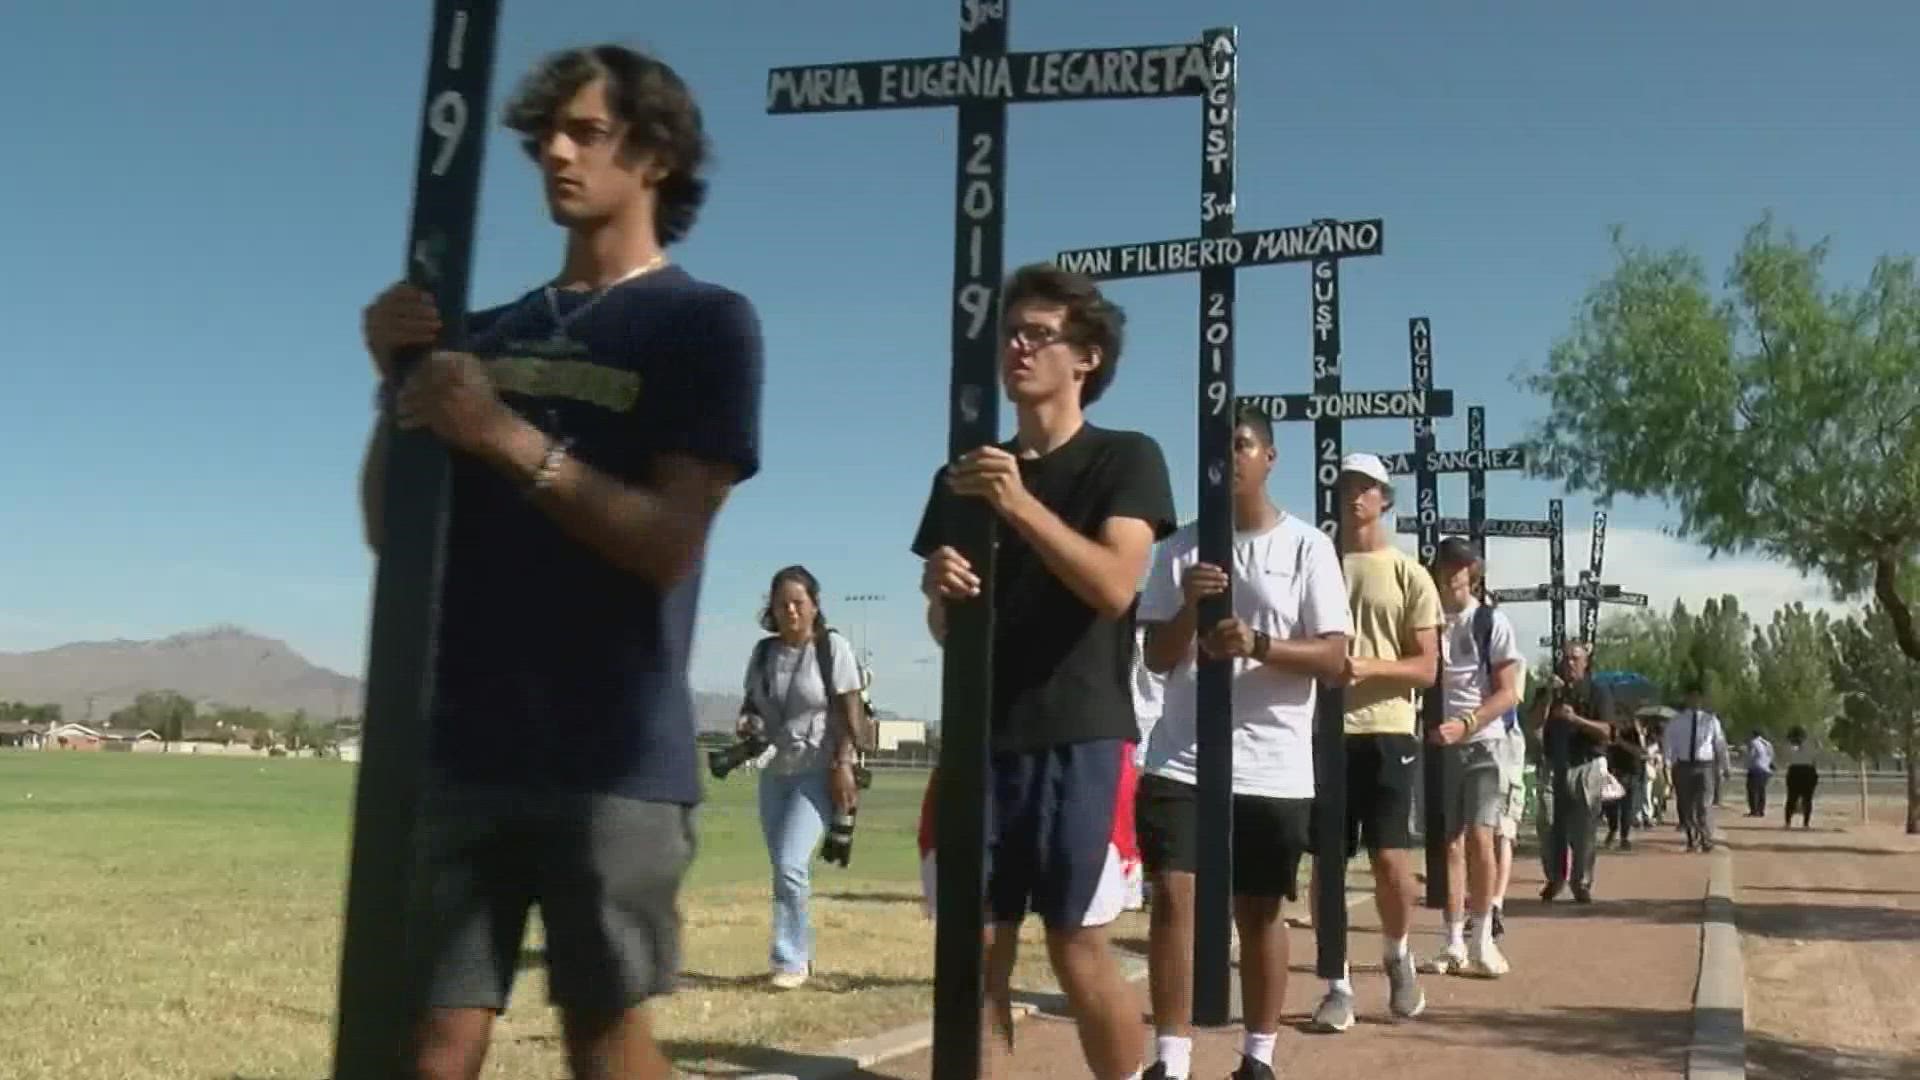 Residents marched with crosses that had the names of victims as Aug. 3, 2022, marked three years since the deadly shooting at an El Paso Walmart.